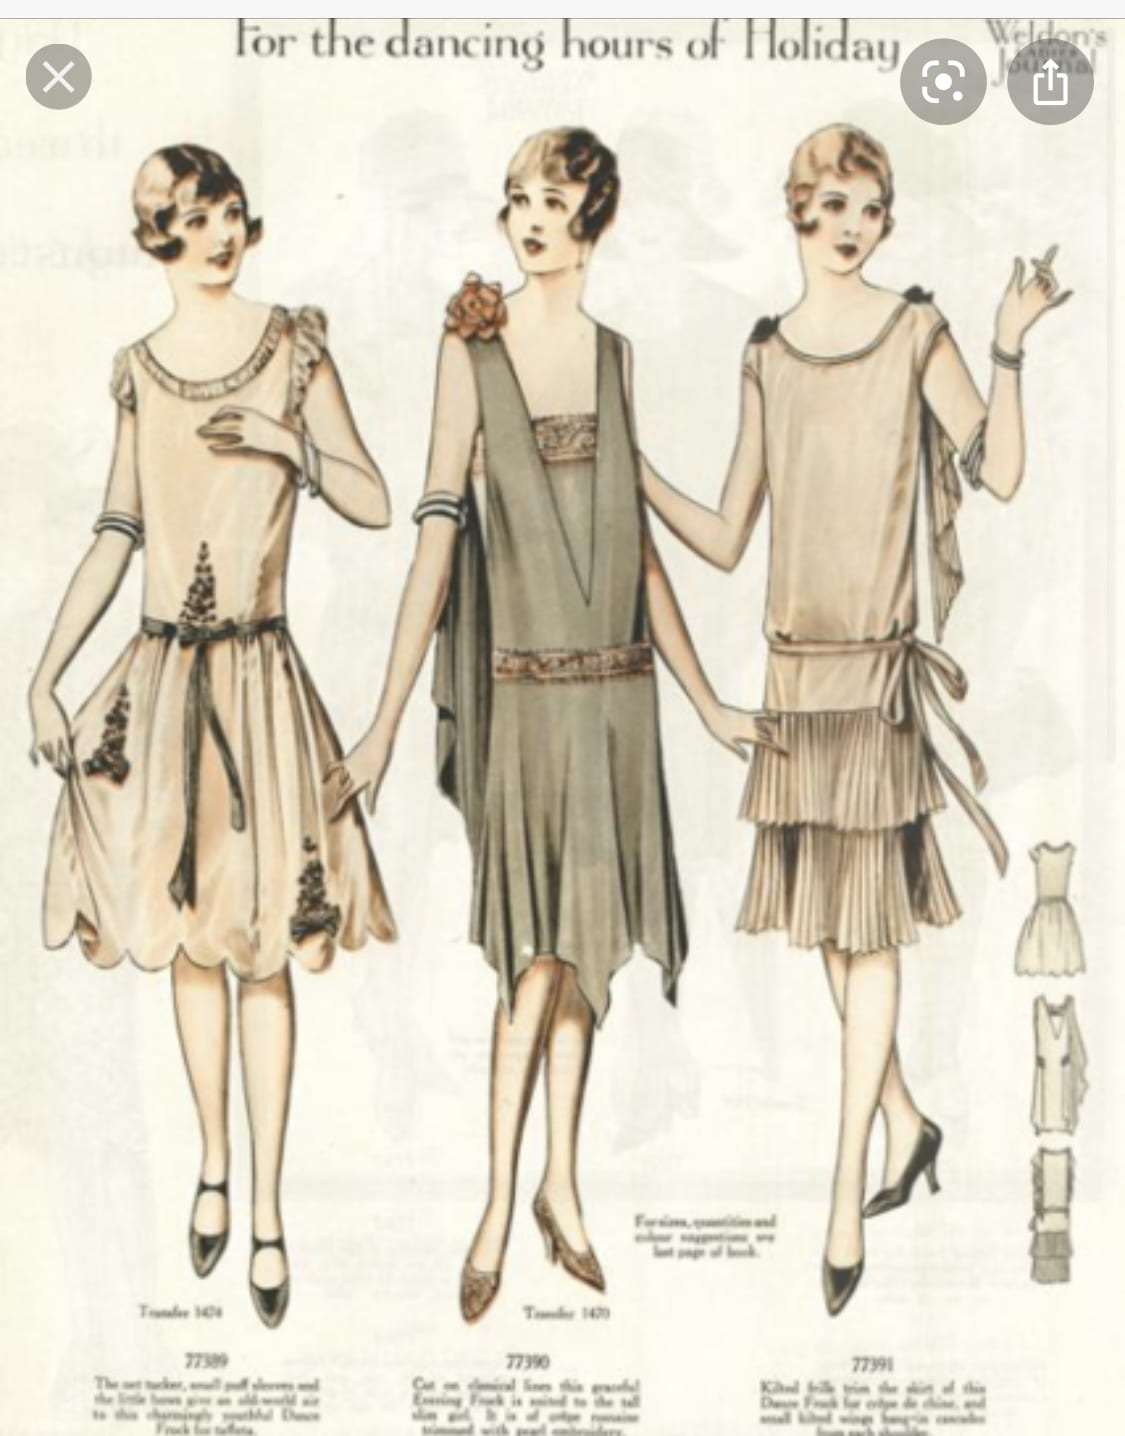 Fashion After 1900 – Image research #2